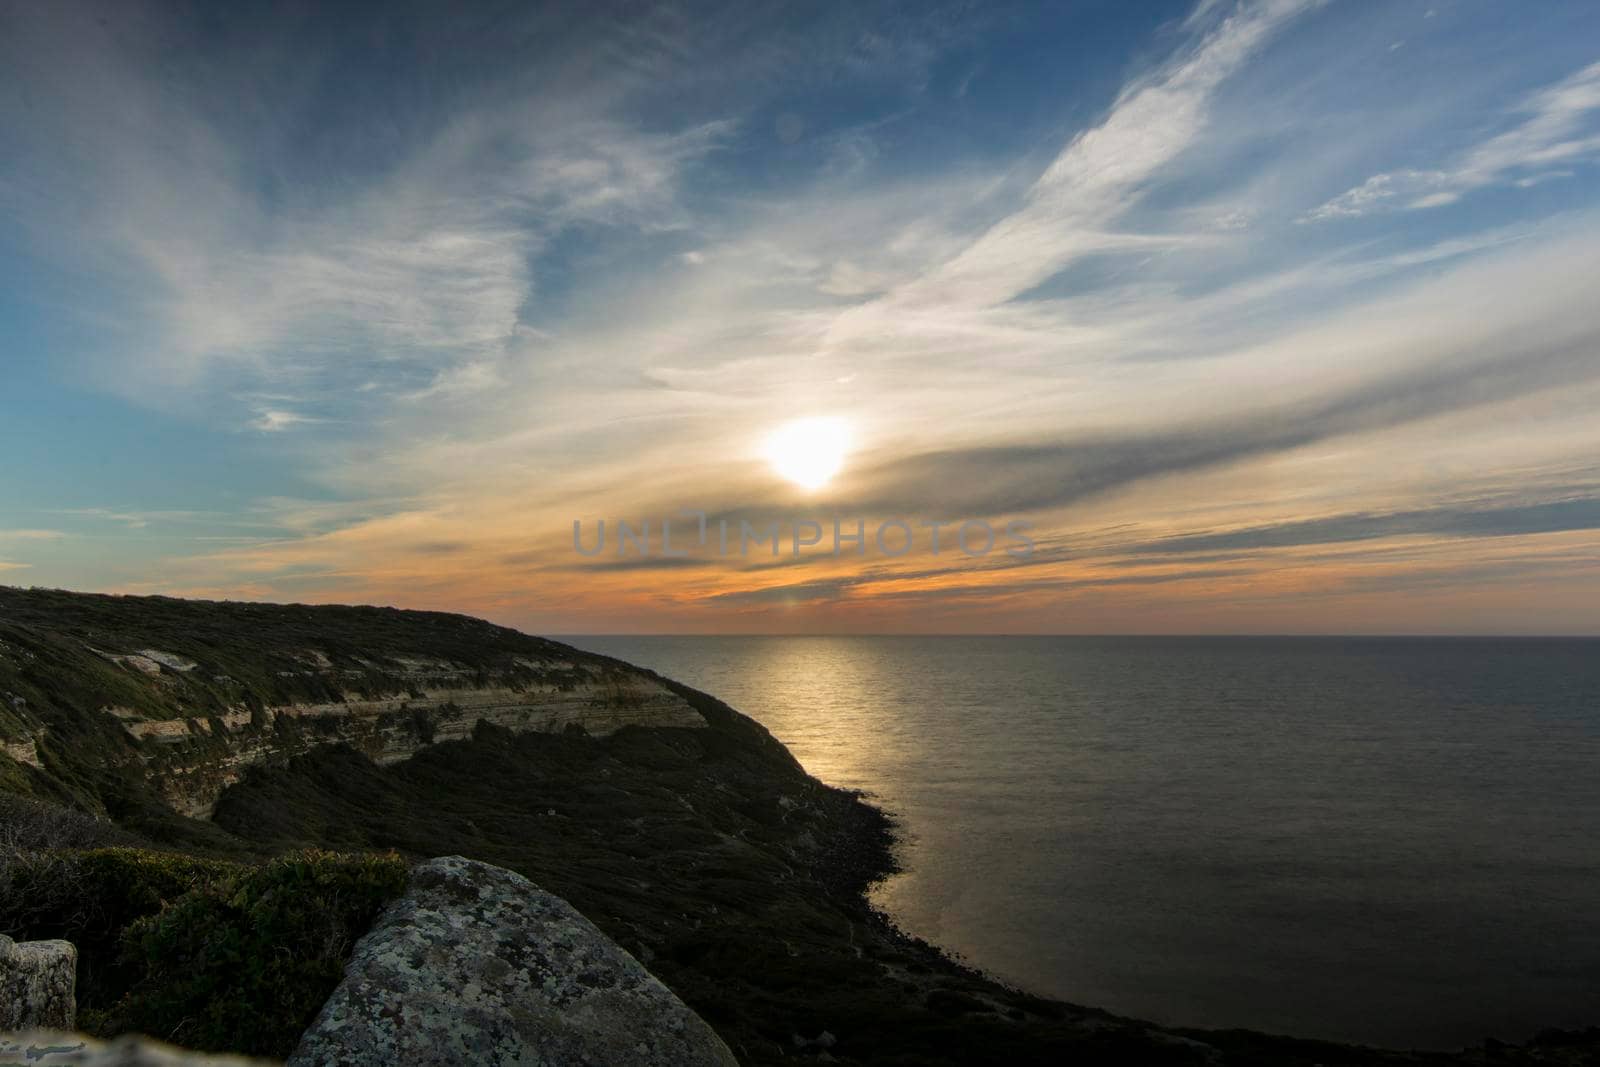 Sunset landscape showing Cape San Marco in Sardegna island in Italy in a long exposure picture